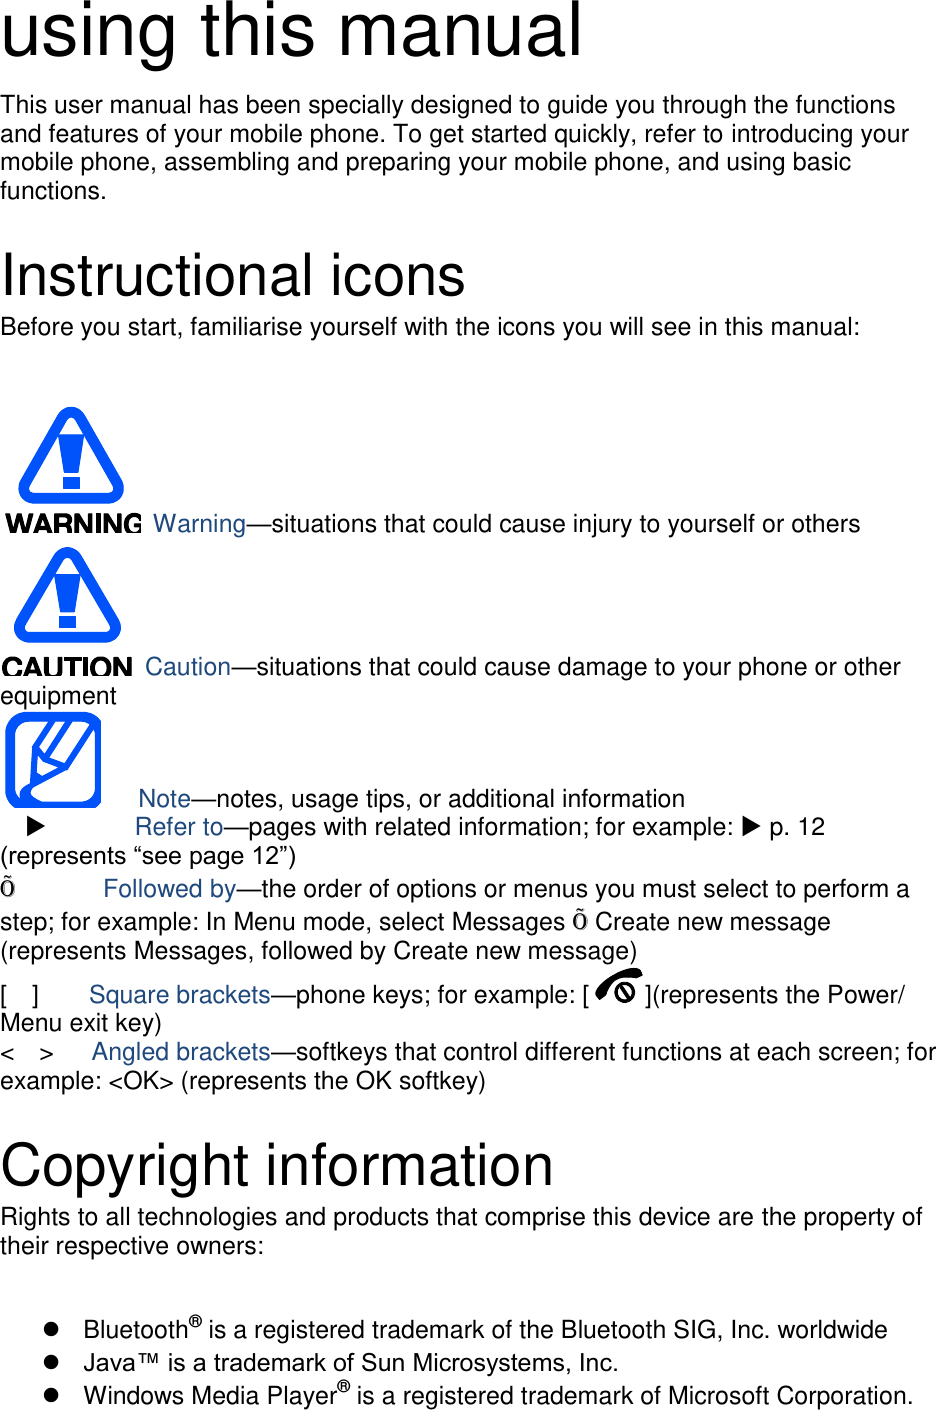 using this manual This user manual has been specially designed to guide you through the functions and features of your mobile phone. To get started quickly, refer to introducing your mobile phone, assembling and preparing your mobile phone, and using basic functions.    Instructional icons Before you start, familiarise yourself with the icons you will see in this manual:     Warning—situations that could cause injury to yourself or others  Caution—situations that could cause damage to your phone or other equipment    Note—notes, usage tips, or additional information          Refer to—pages with related information; for example:  p. 12 (represents “see page 12”) Õ       Followed by—the order of options or menus you must select to perform a step; for example: In Menu mode, select Messages Õ Create new message (represents Messages, followed by Create new message) [    ]    Square brackets—phone keys; for example: [ ](represents the Power/ Menu exit key) &lt;    &gt;    Angled brackets—softkeys that control different functions at each screen; for example: &lt;OK&gt; (represents the OK softkey)  Copyright information Rights to all technologies and products that comprise this device are the property of their respective owners:    Bluetooth® is a registered trademark of the Bluetooth SIG, Inc. worldwide  Java™ is a trademark of Sun Microsystems, Inc.   Windows Media Player® is a registered trademark of Microsoft Corporation. 